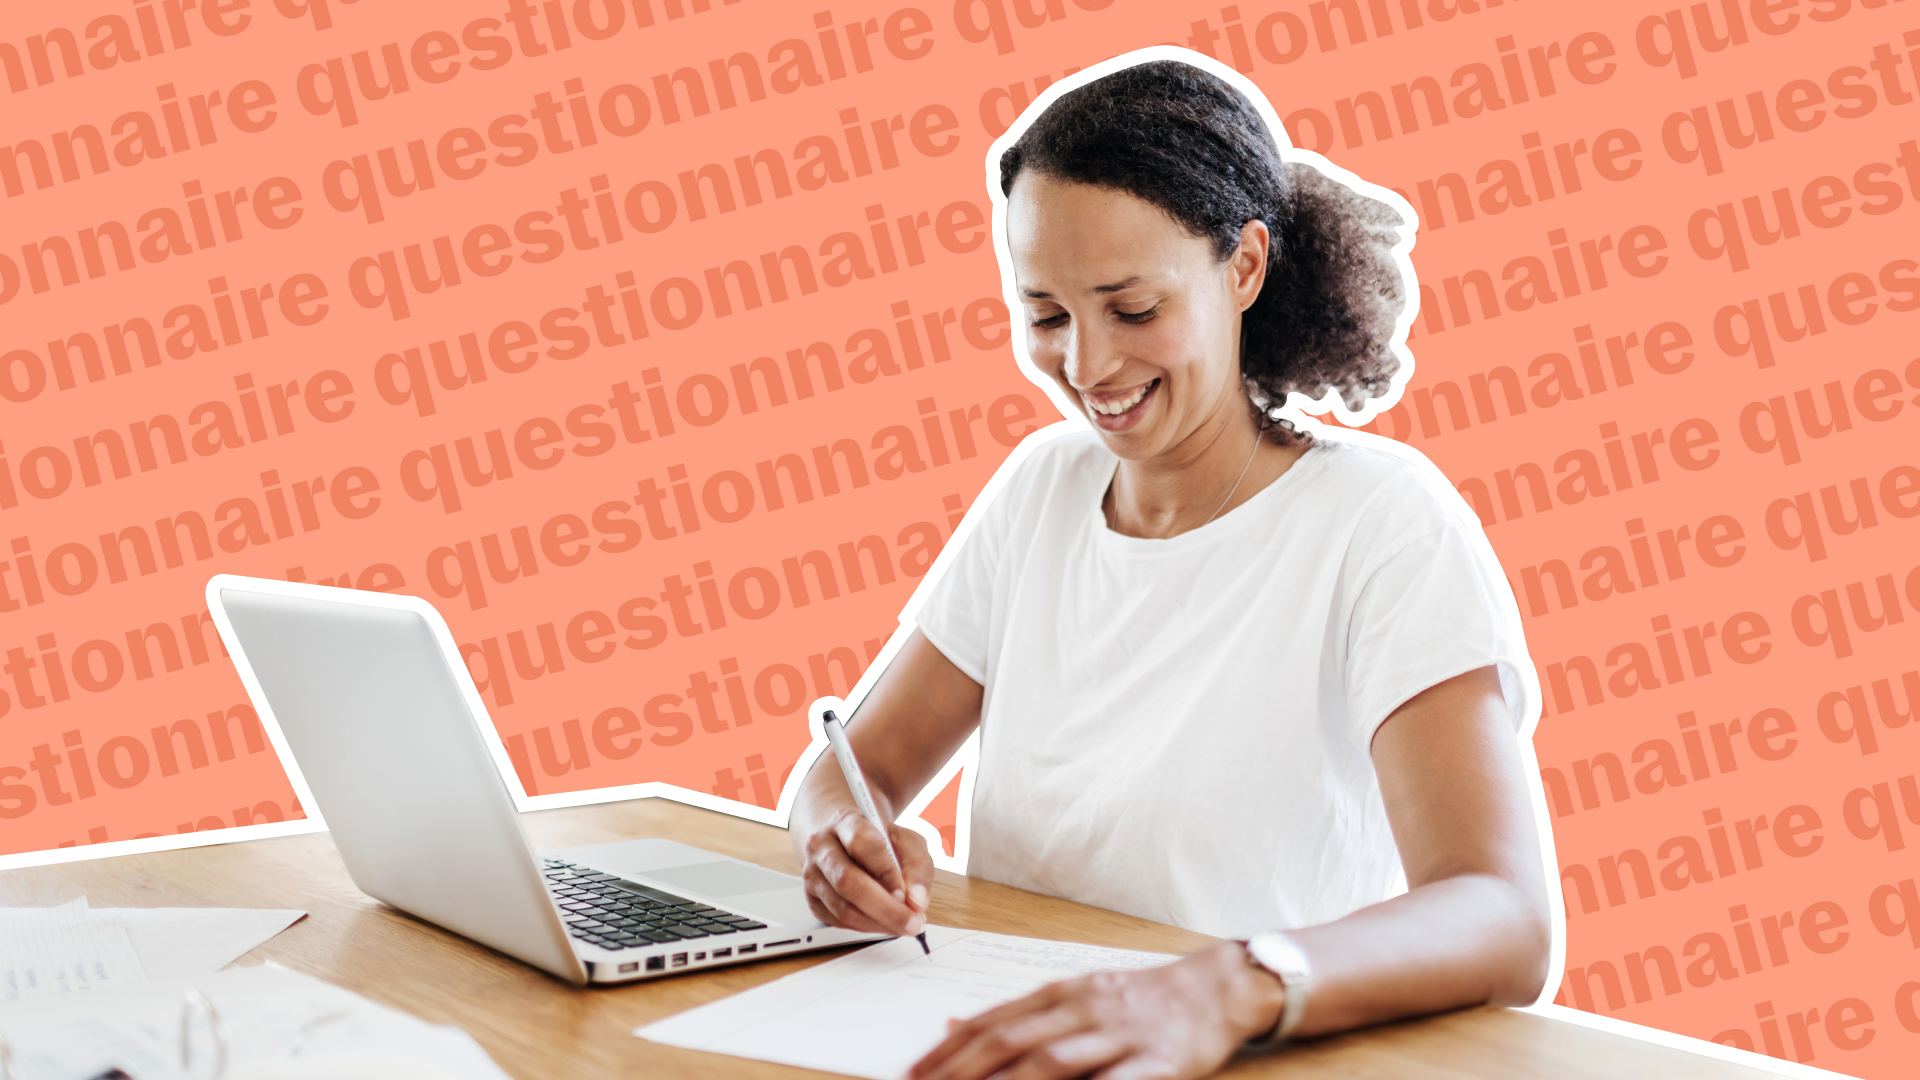 Getting to Know You Questionnaire for New Remote Employees